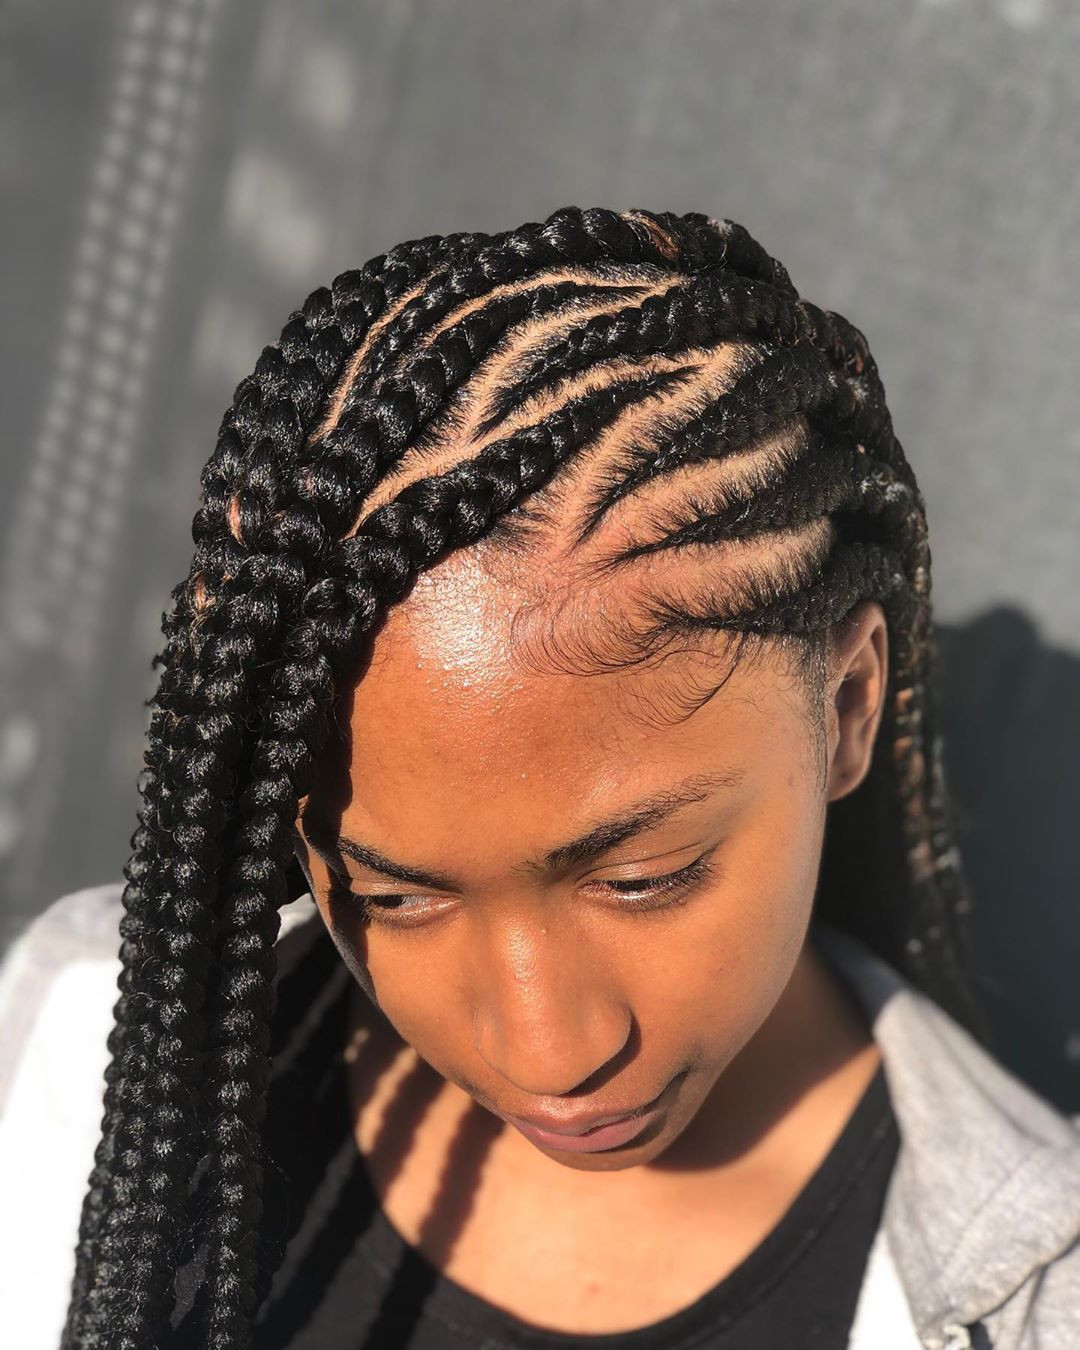 Braid Hairstyles 2020
 2020 African Braided Hairstyles for Beautiful La s